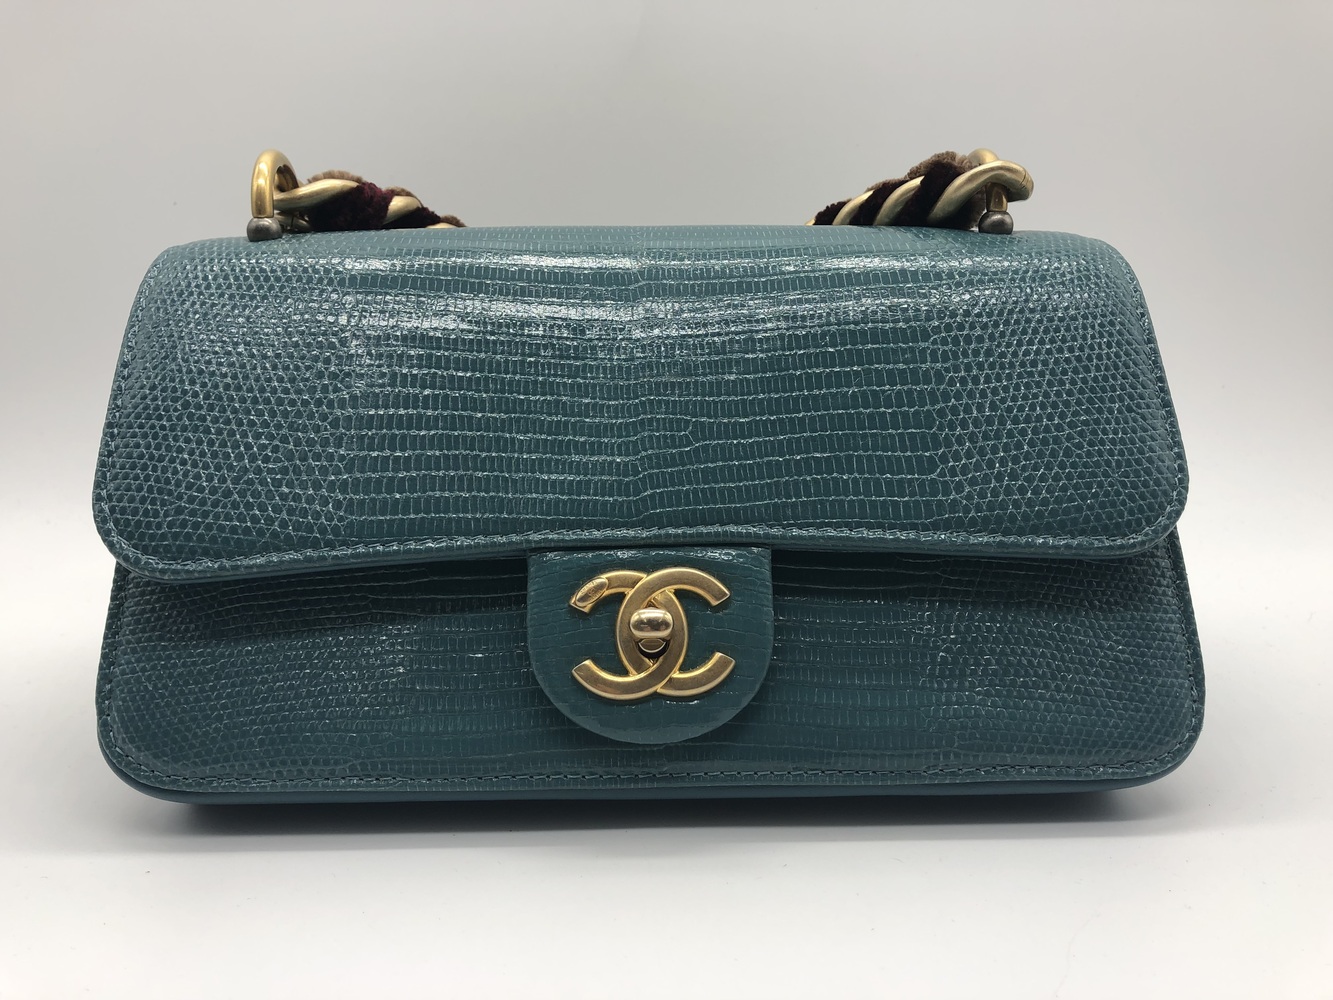 Rare EXOTIC Chanel Straight Lined Teal Lizard Mini Flap Shoulder Bag